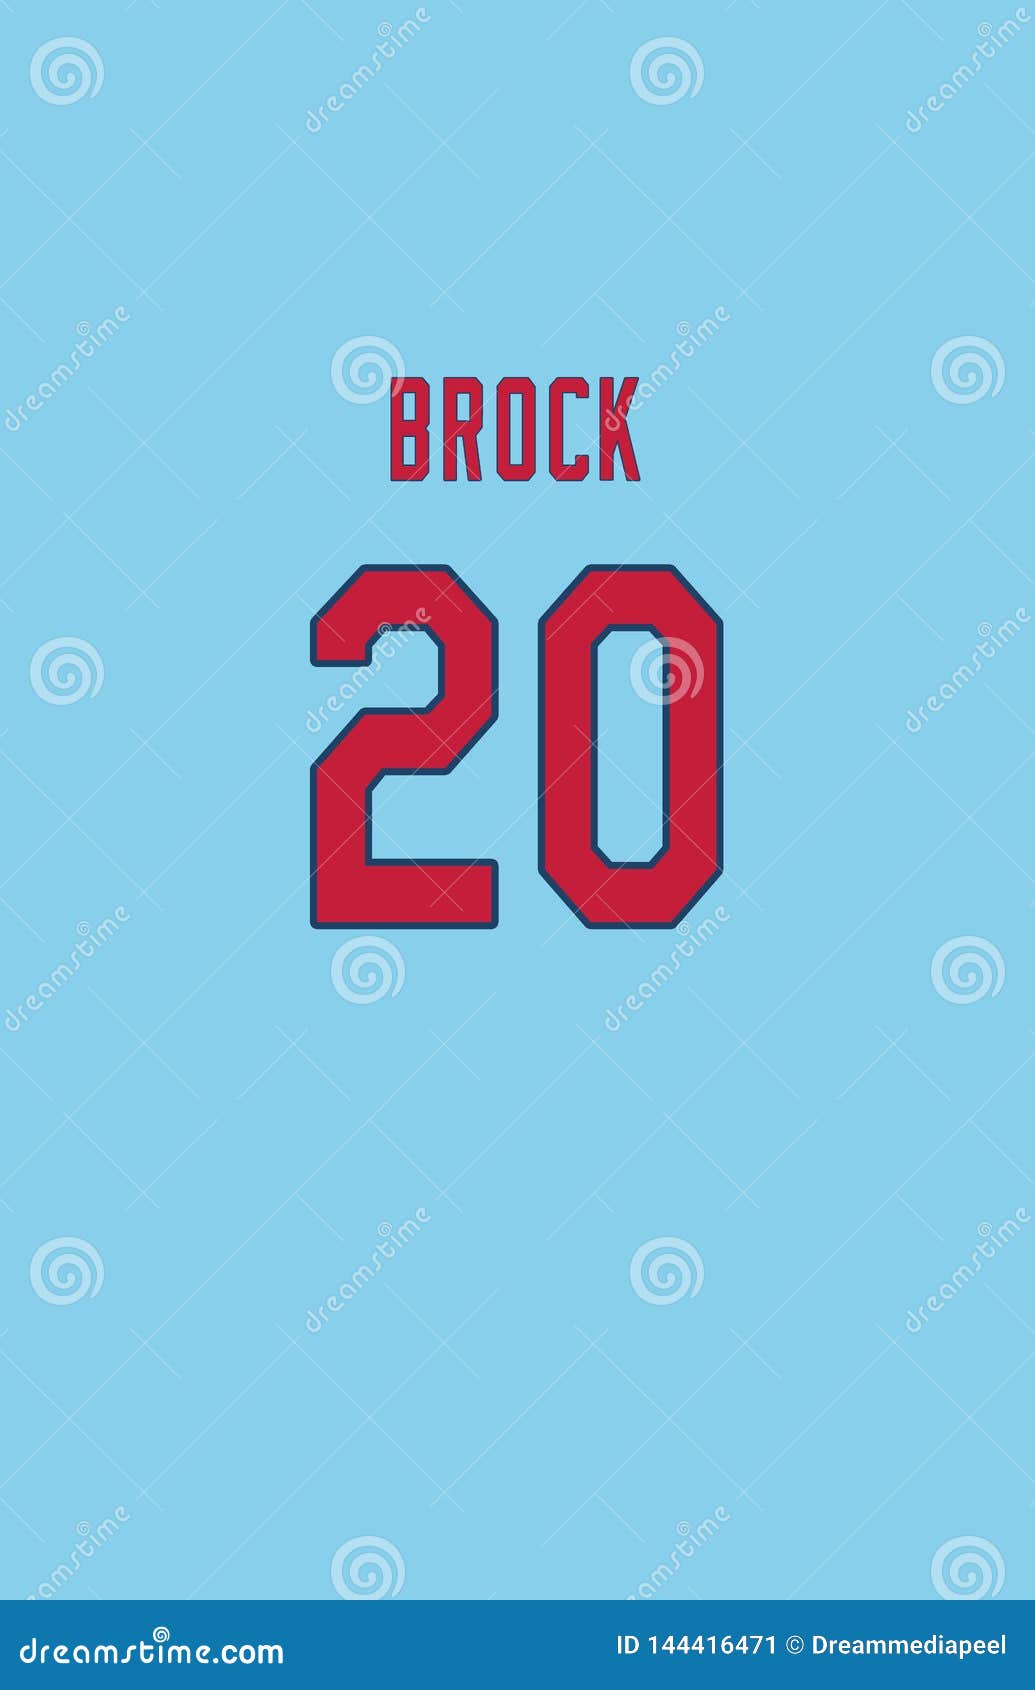 st louis cardinals jersey numbers